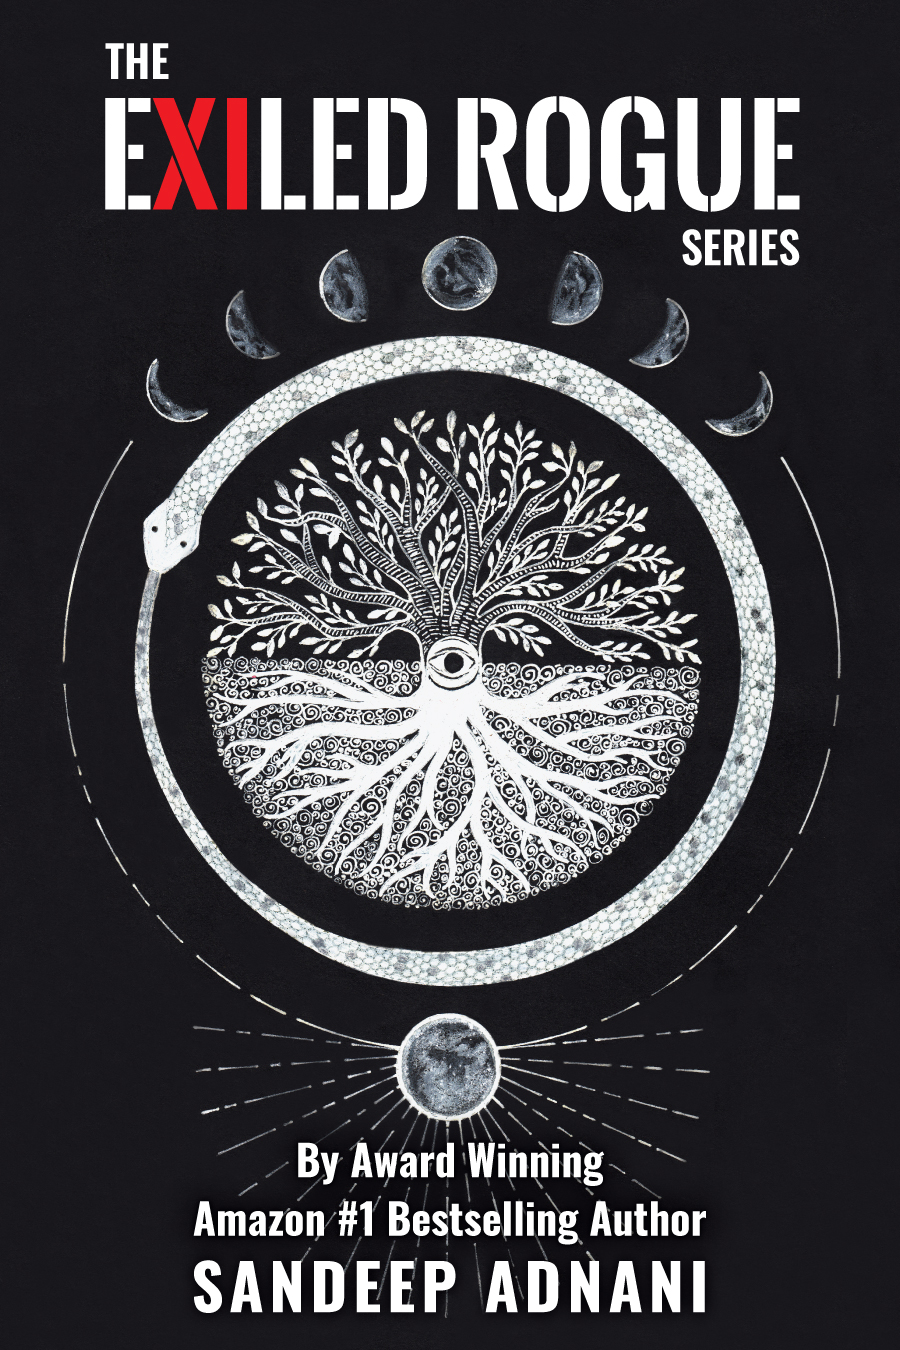 The cover is hand-drawn and represents the philosophy of the trilogy. The first book is represented by the shining sun and the cycle of the moon. The second book is represented by the tree of life and the all seeing eye. The third book is represented by the Ouroboros, the never ending cycle of life and death, birth and rebirth. Together, they represent 'The Exiled Rogue Series', the omnibus edition of the three books.